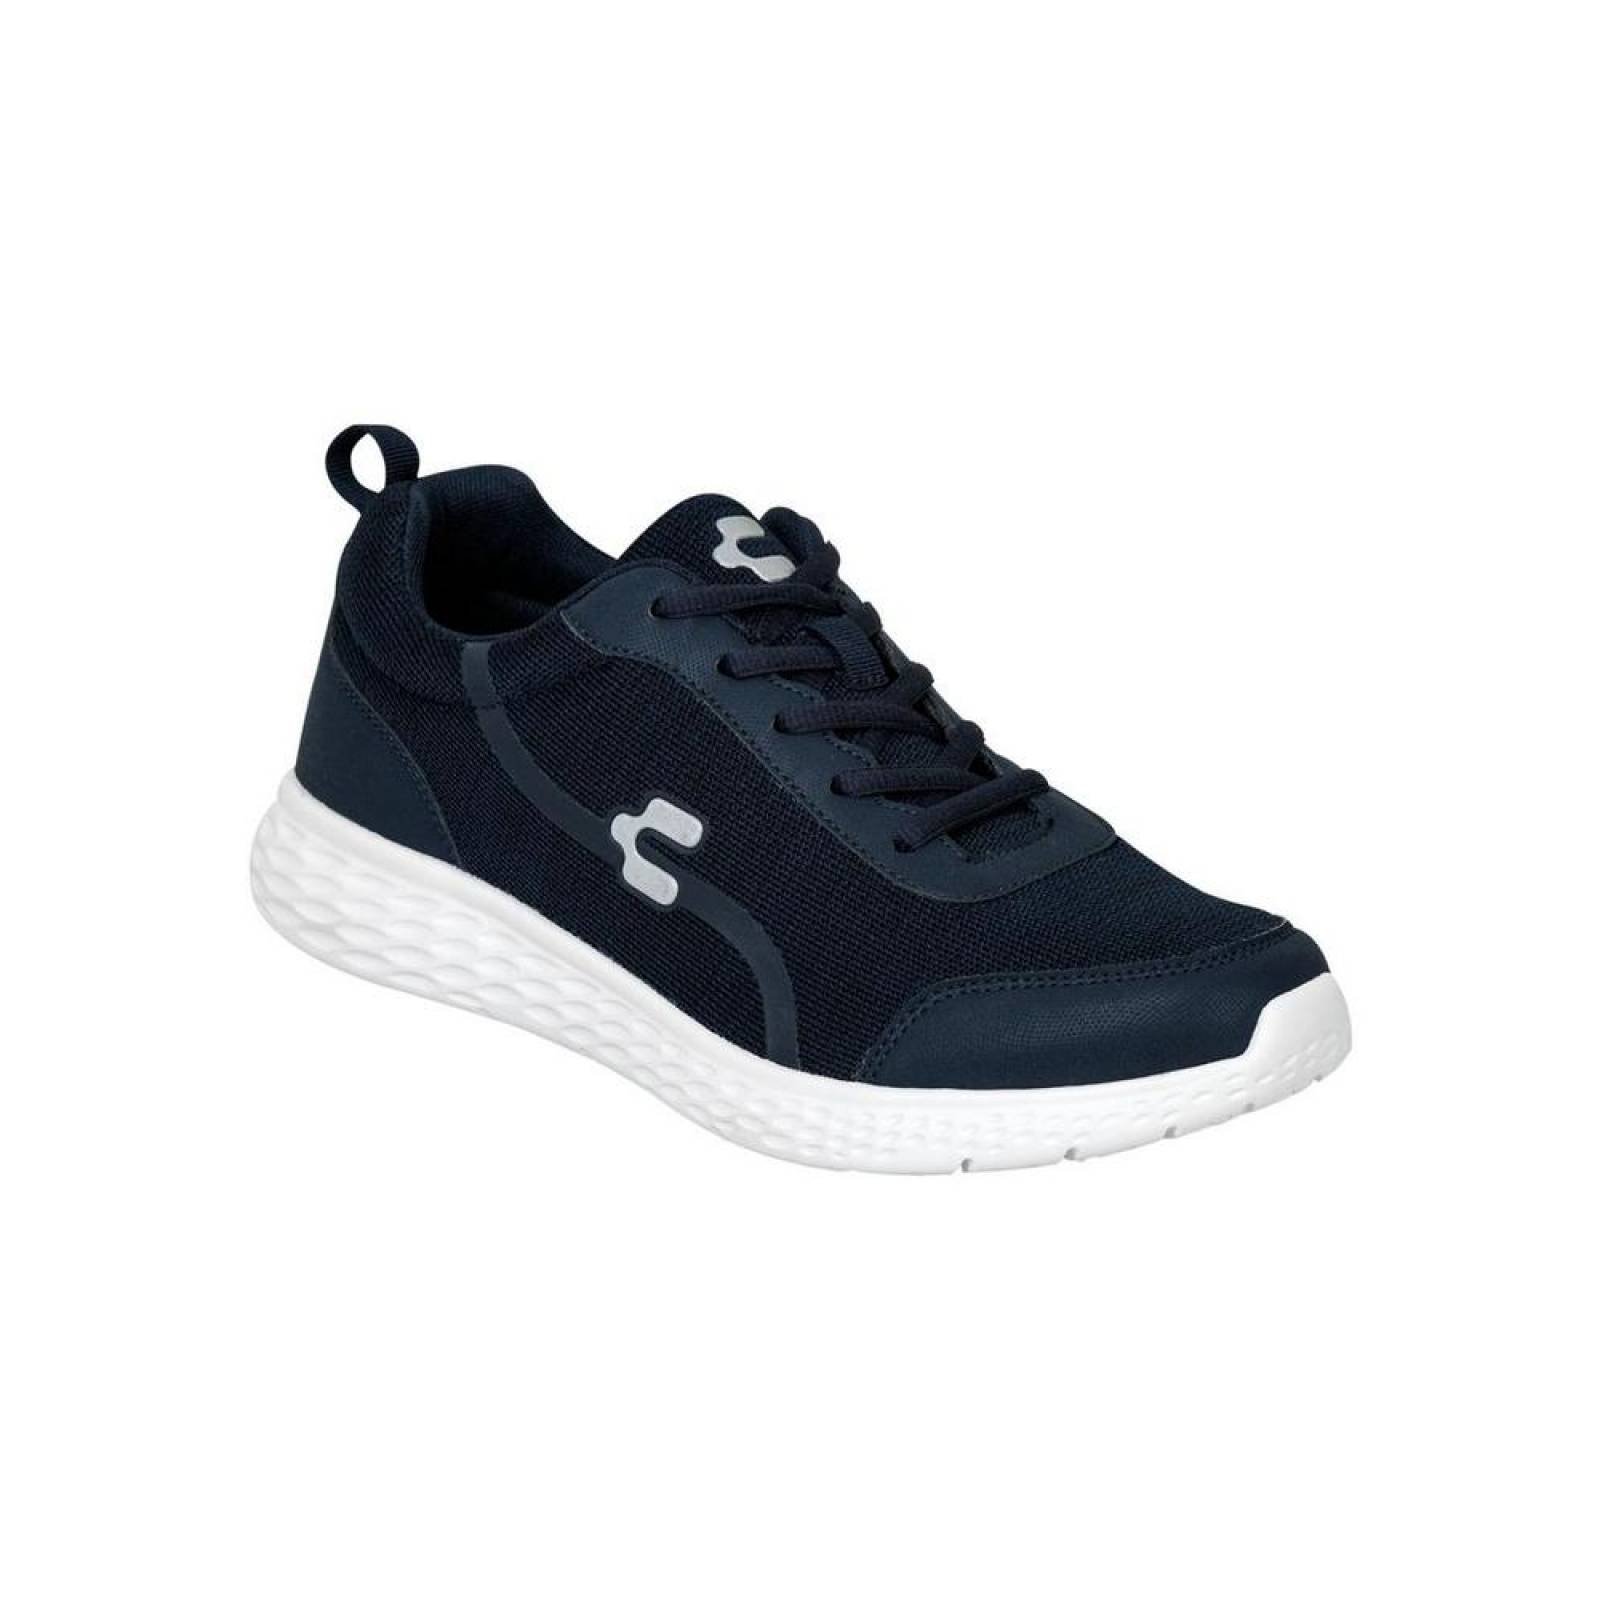 Tenis Charly Hombre Azul Textil 1029292 